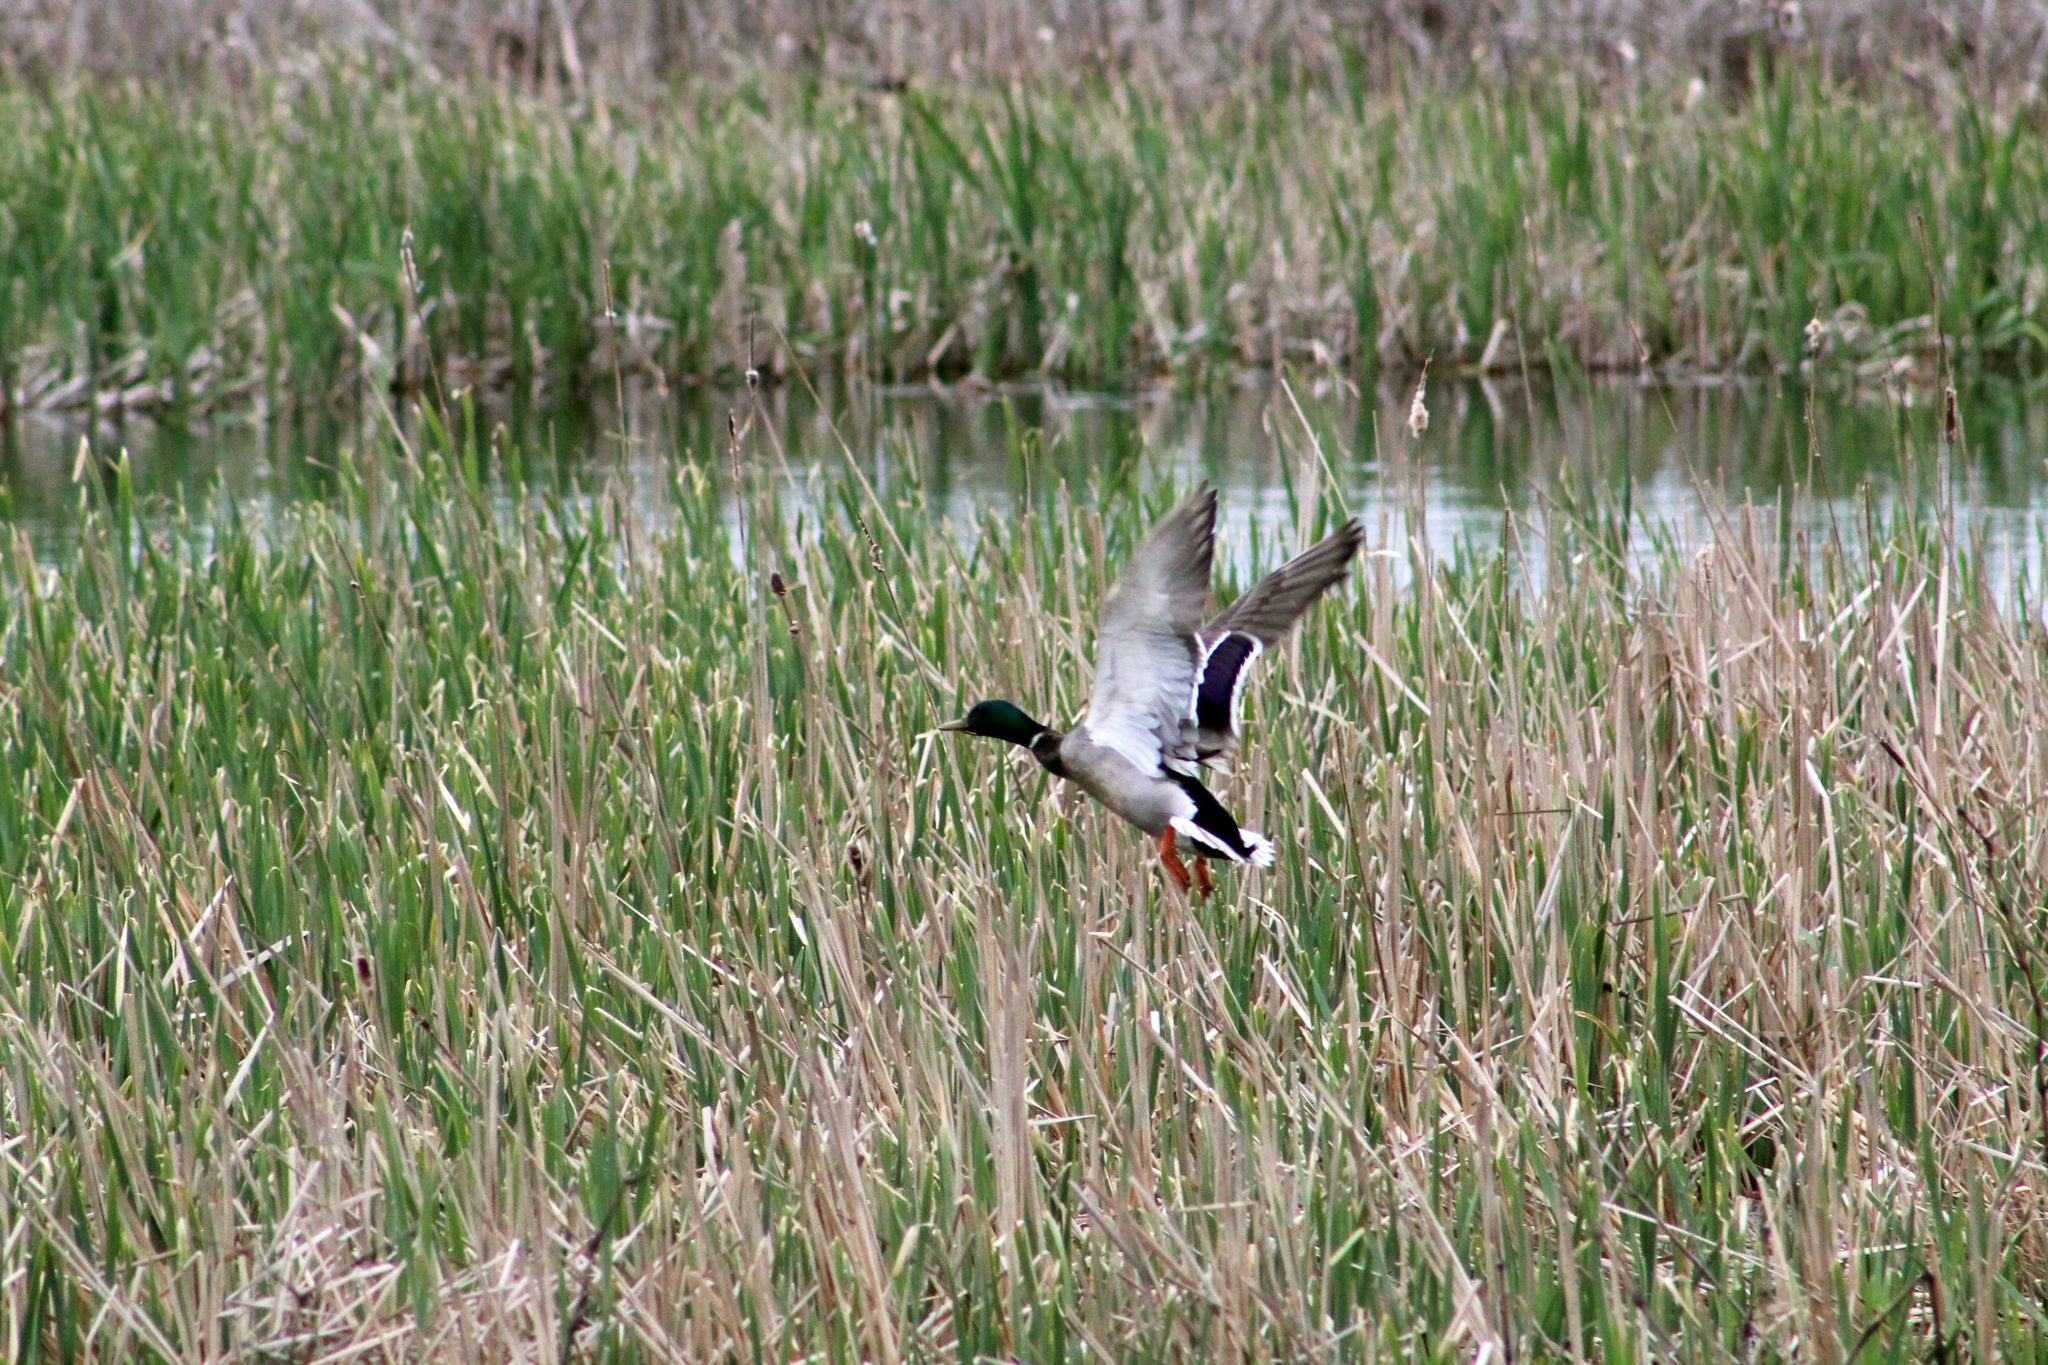 A mallard duck rises above the rushes in the swamps of the Montezuma Wildlife Refuge in Seneca Falls, New York, USA.